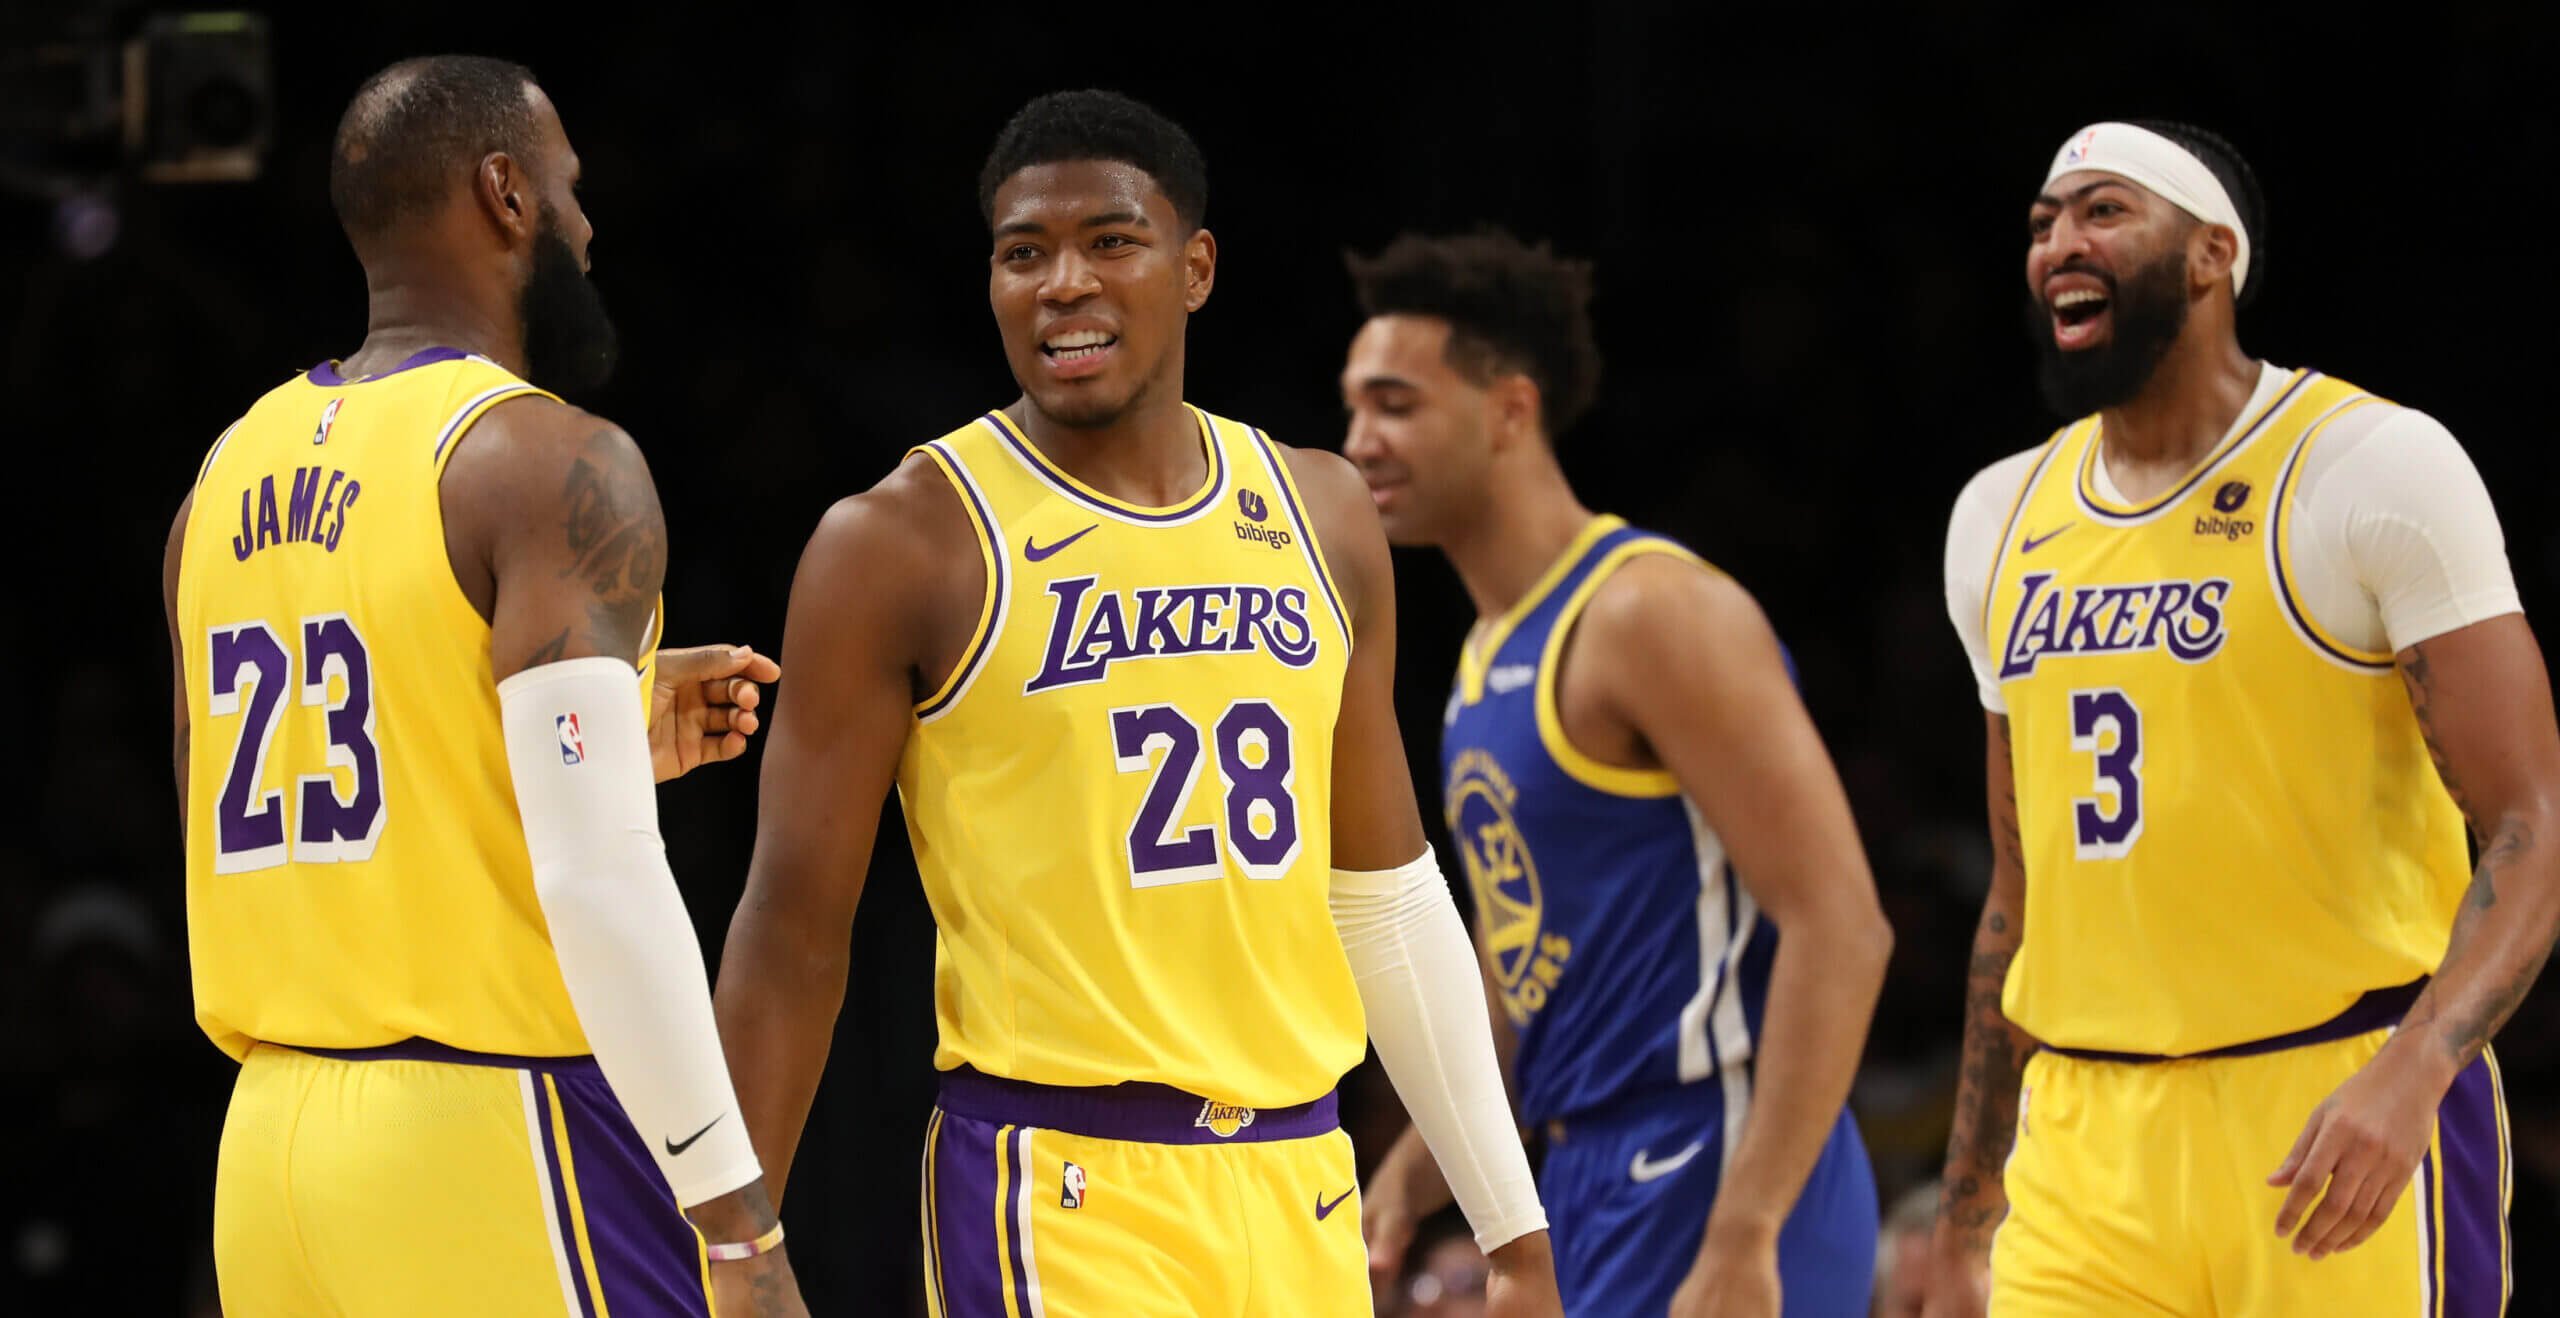 Lakers' Lineup Shakeup: Hachimura's Rise Amid Injury Woes